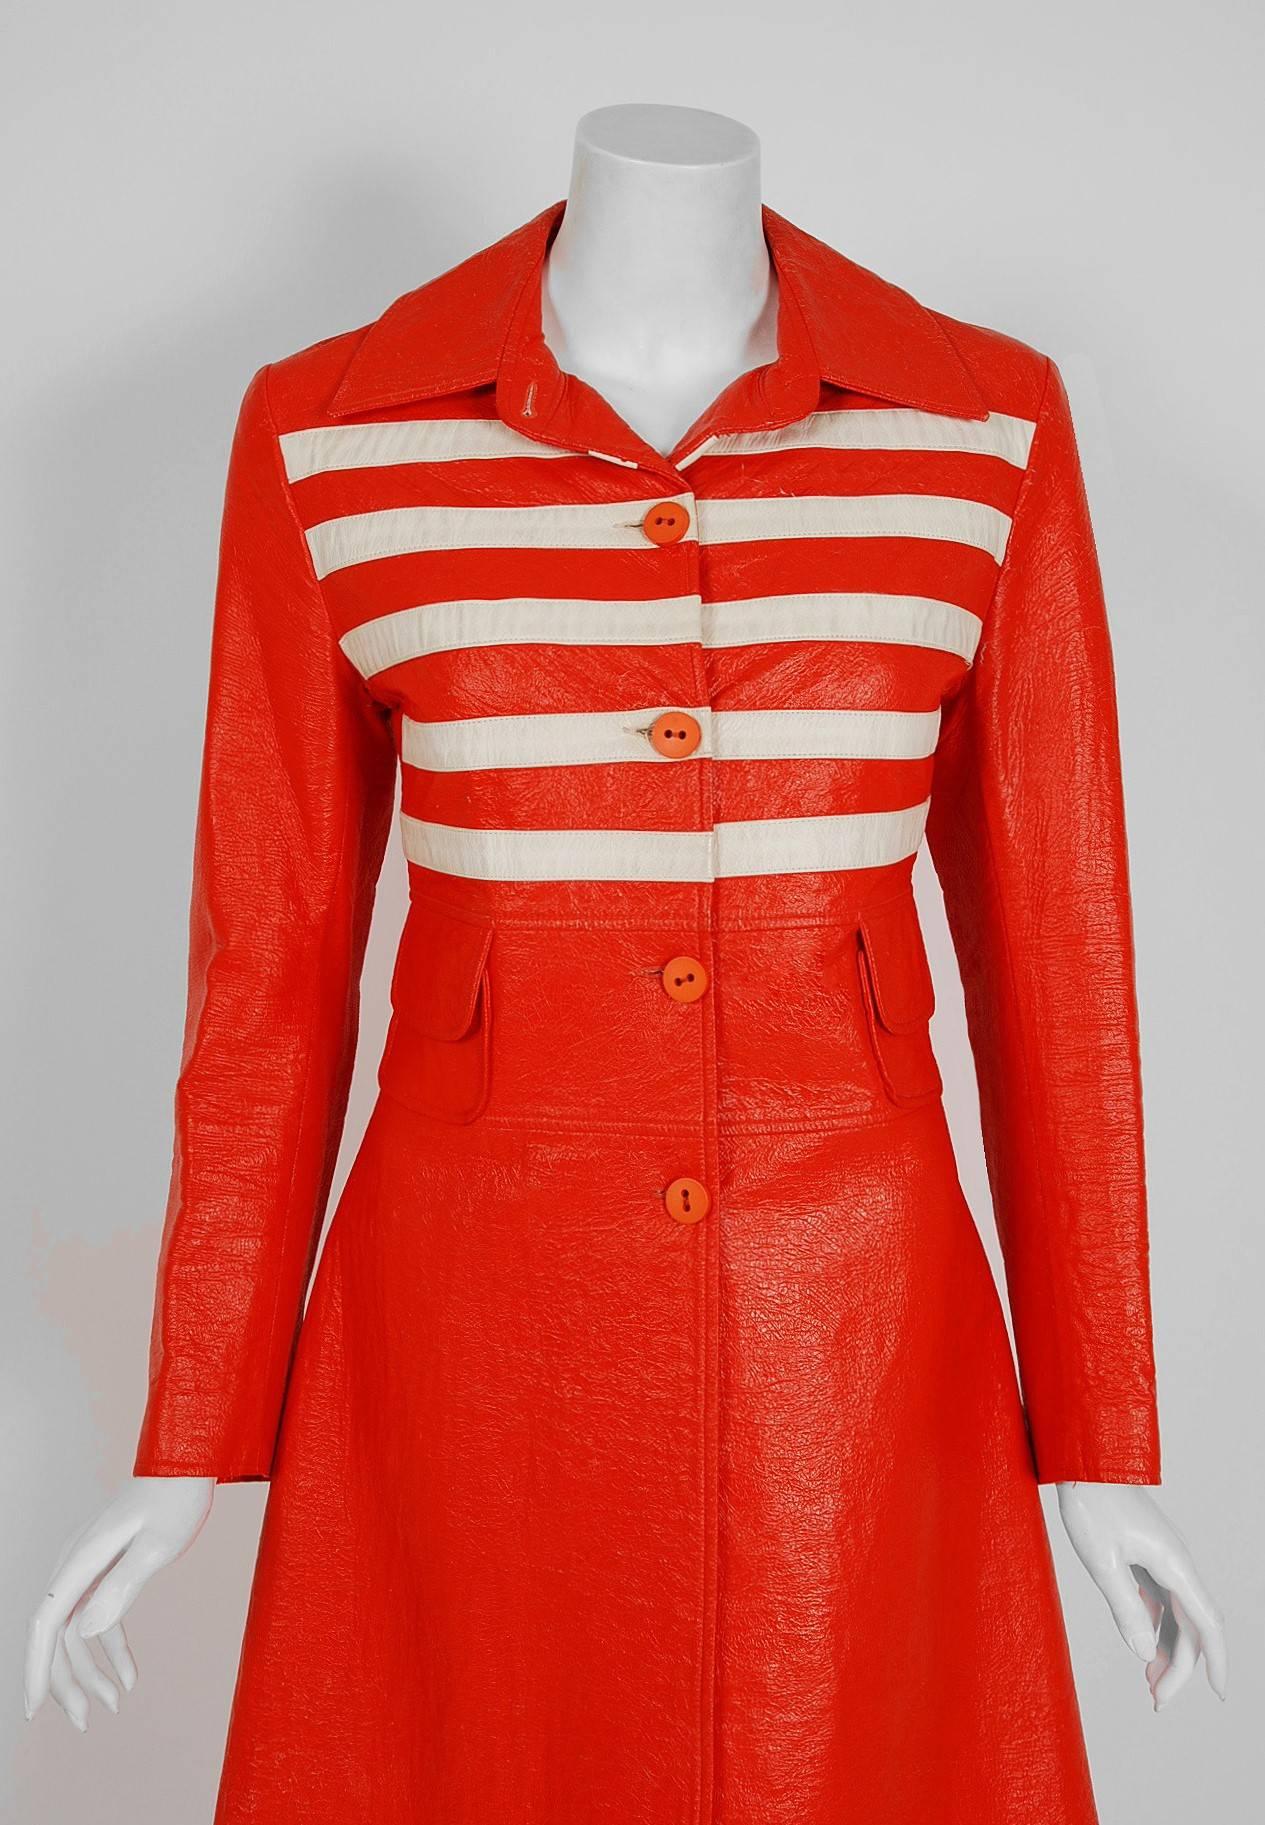 Breathtaking Louis Feraud orange & white striped vinyl trench coat from his 1968 collection. Feraud's career started when he opened his first French boutique in 1955. As luck would have it, Brigitte Bardot bought one of his dresses and the attention